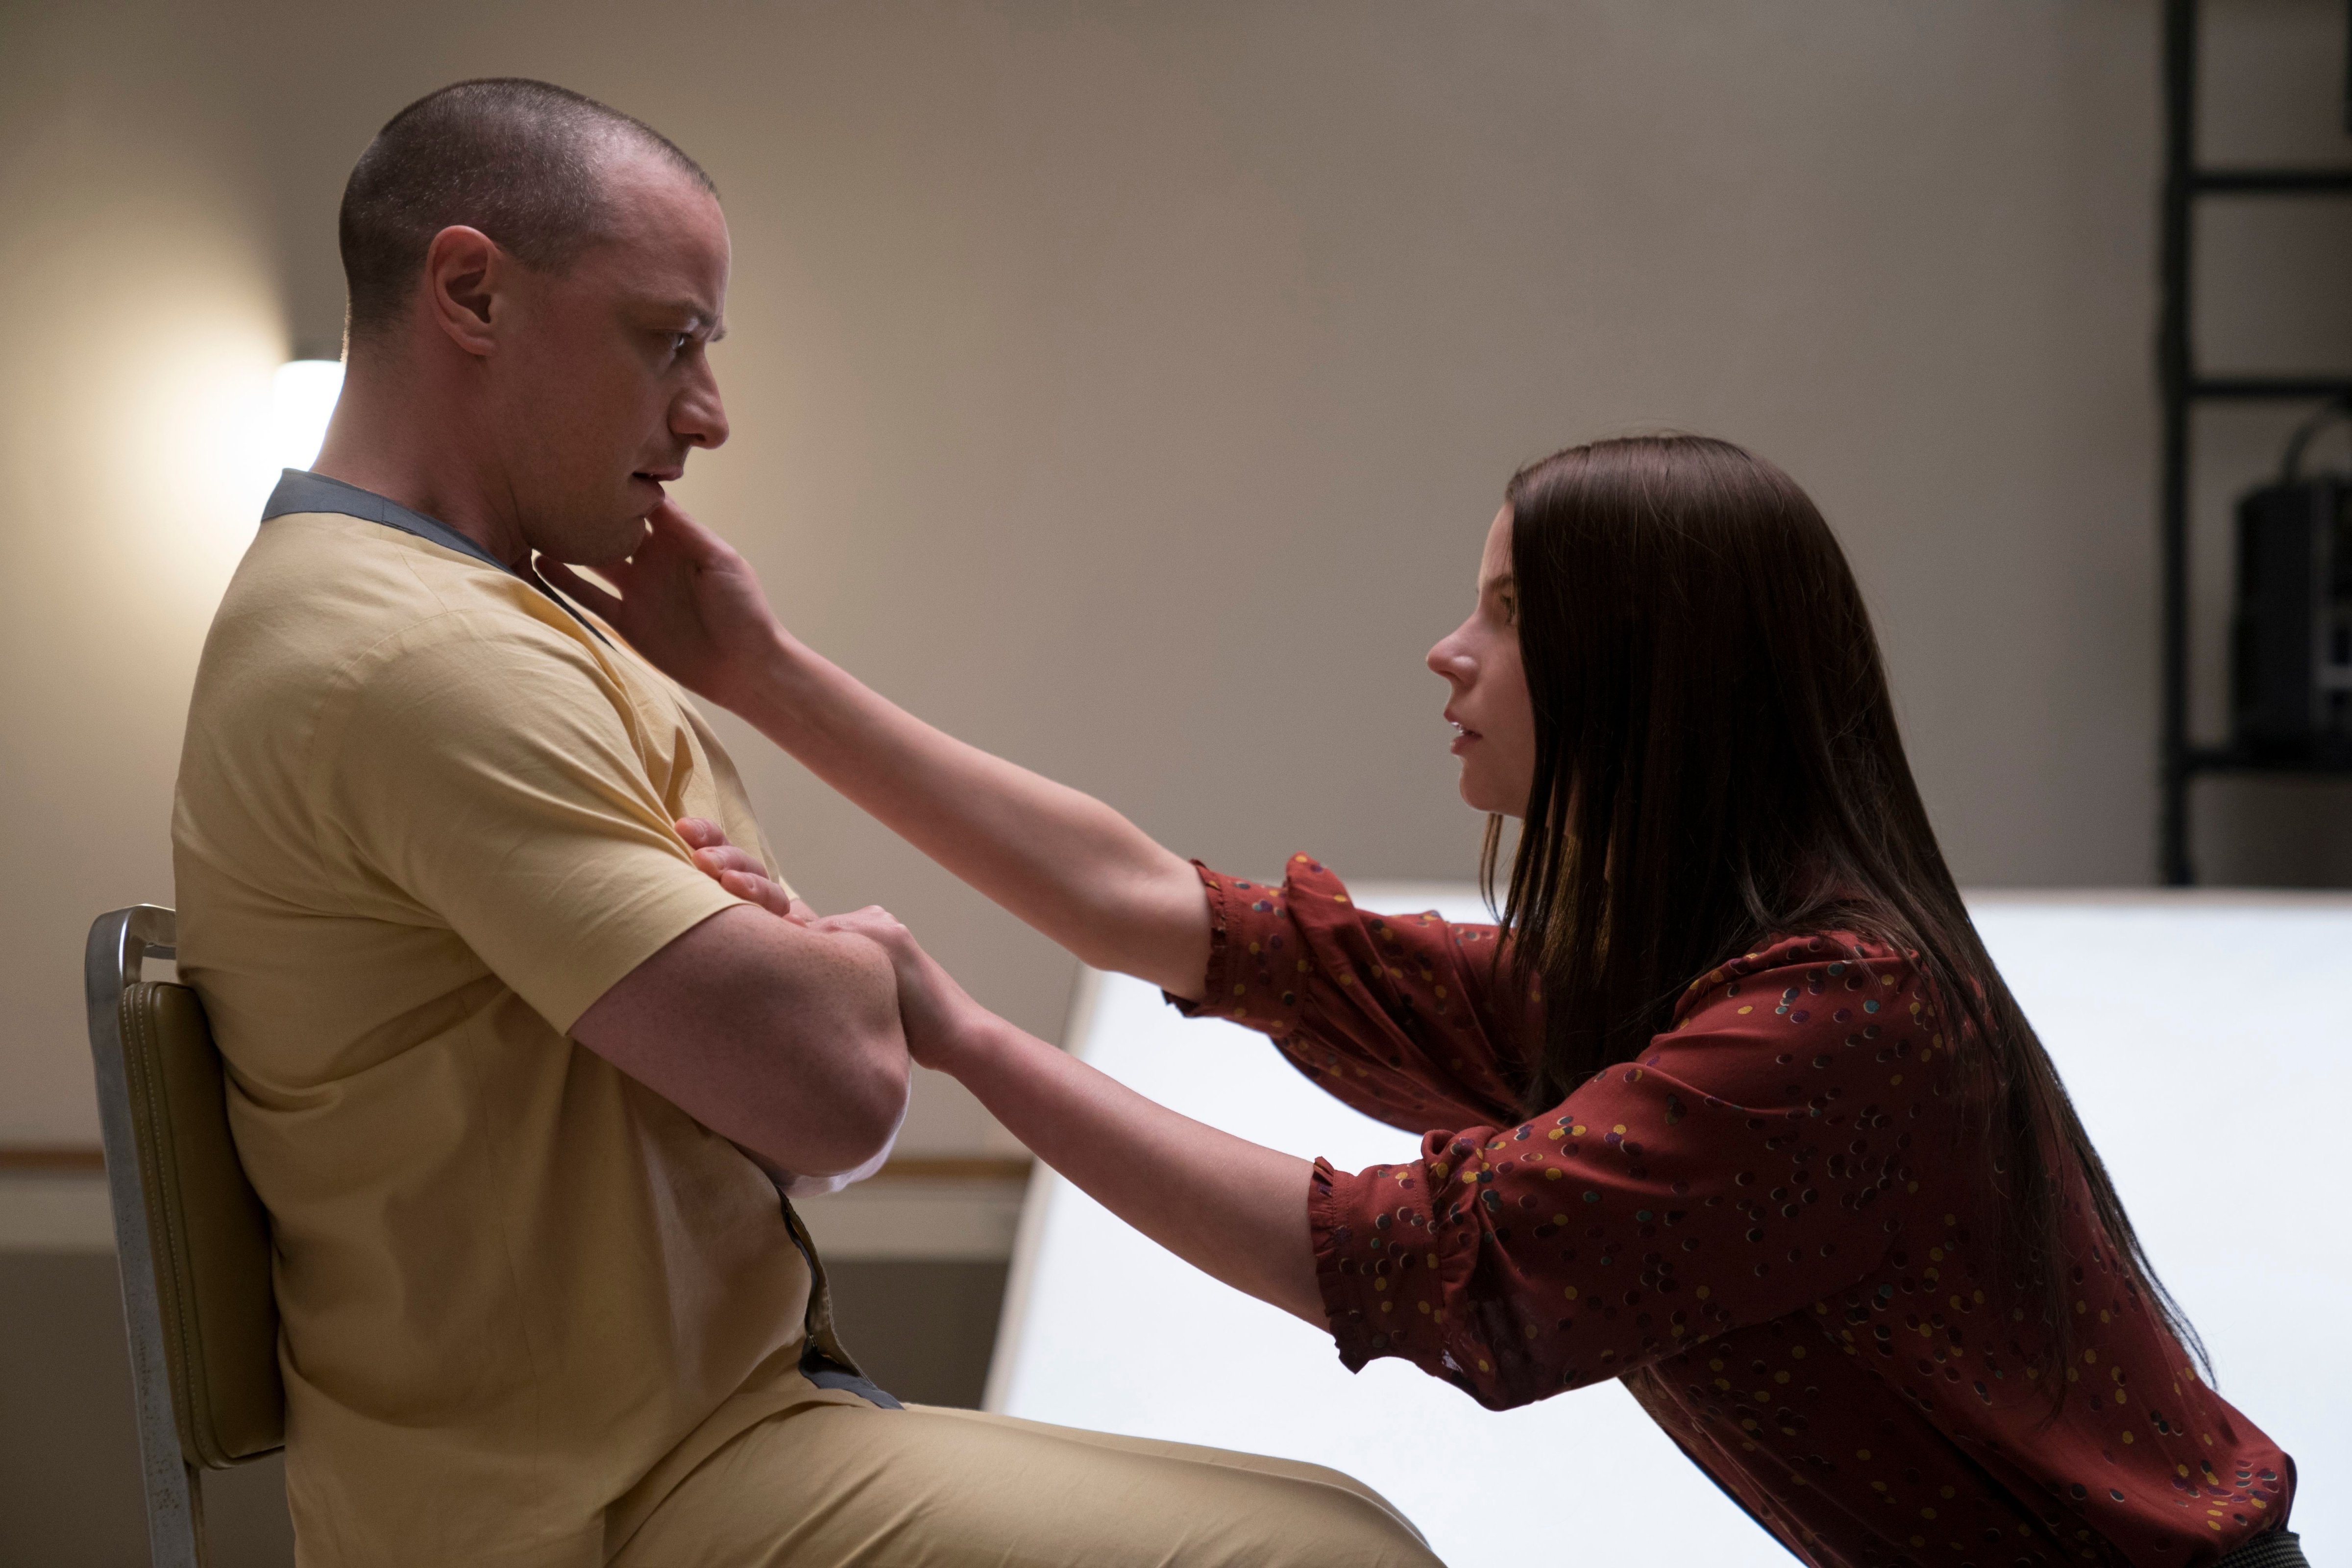 James McAvoy as Kevin Wendell Crumb/The Horde and Anya Taylor-Joy as Casey Cooke in 'Glass' (J Kourkounis—Universal/Kobal/REX/Shutterstock)